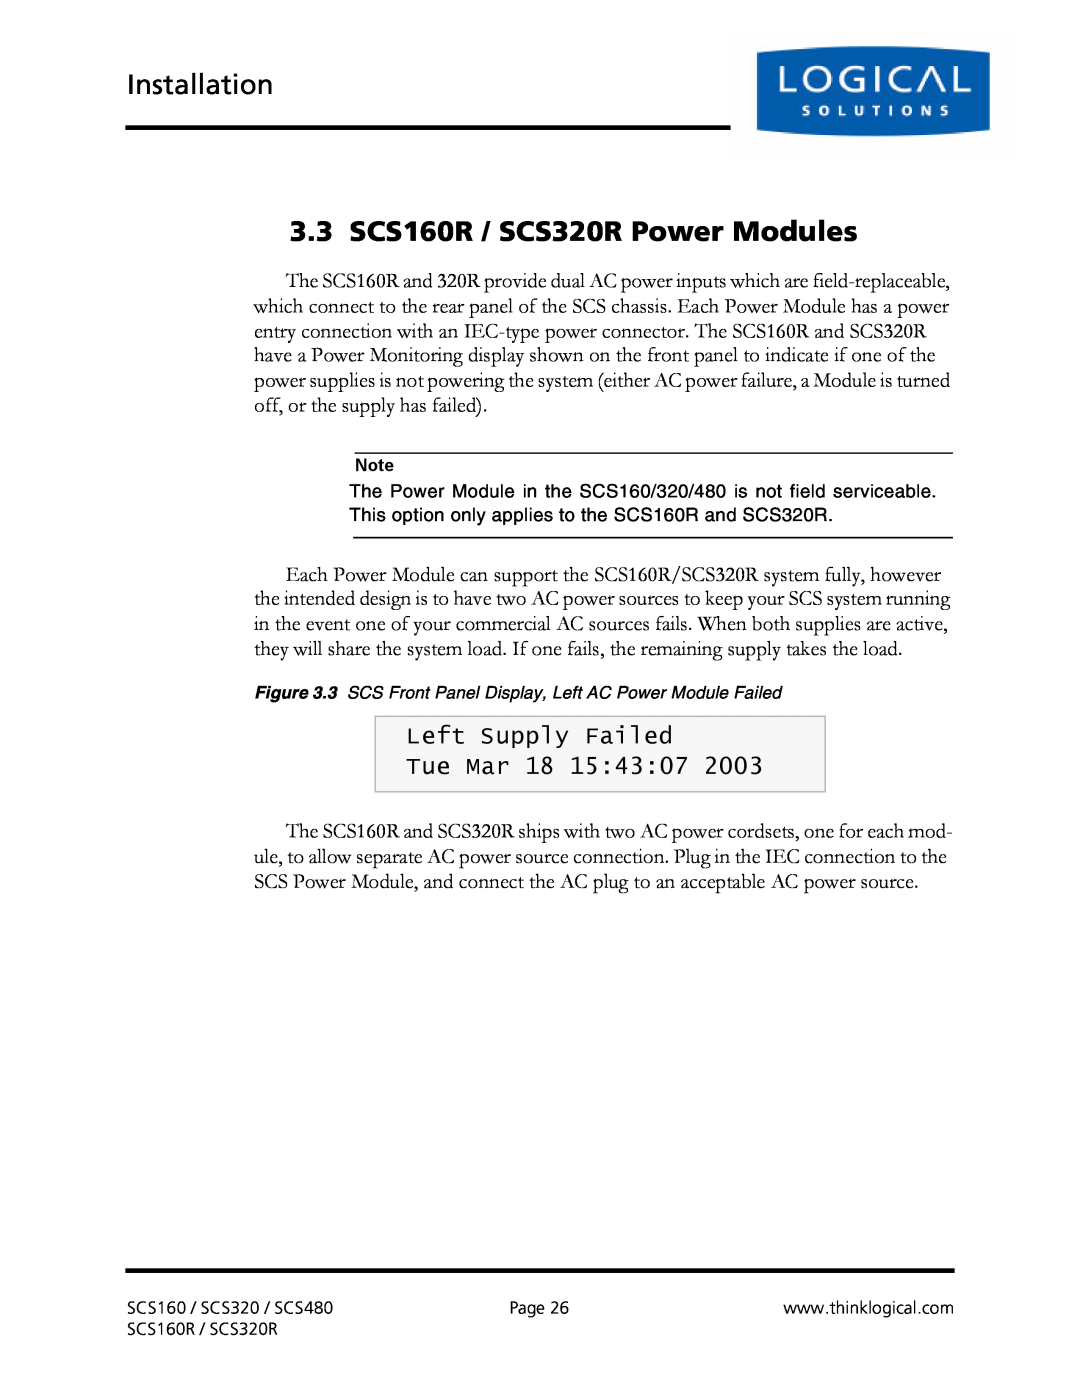 Logical Solutions SCS-R manual 3.3 SCS160R / SCS320R Power Modules, Left Supply Failed Tue Mar 18 154307, Installation 